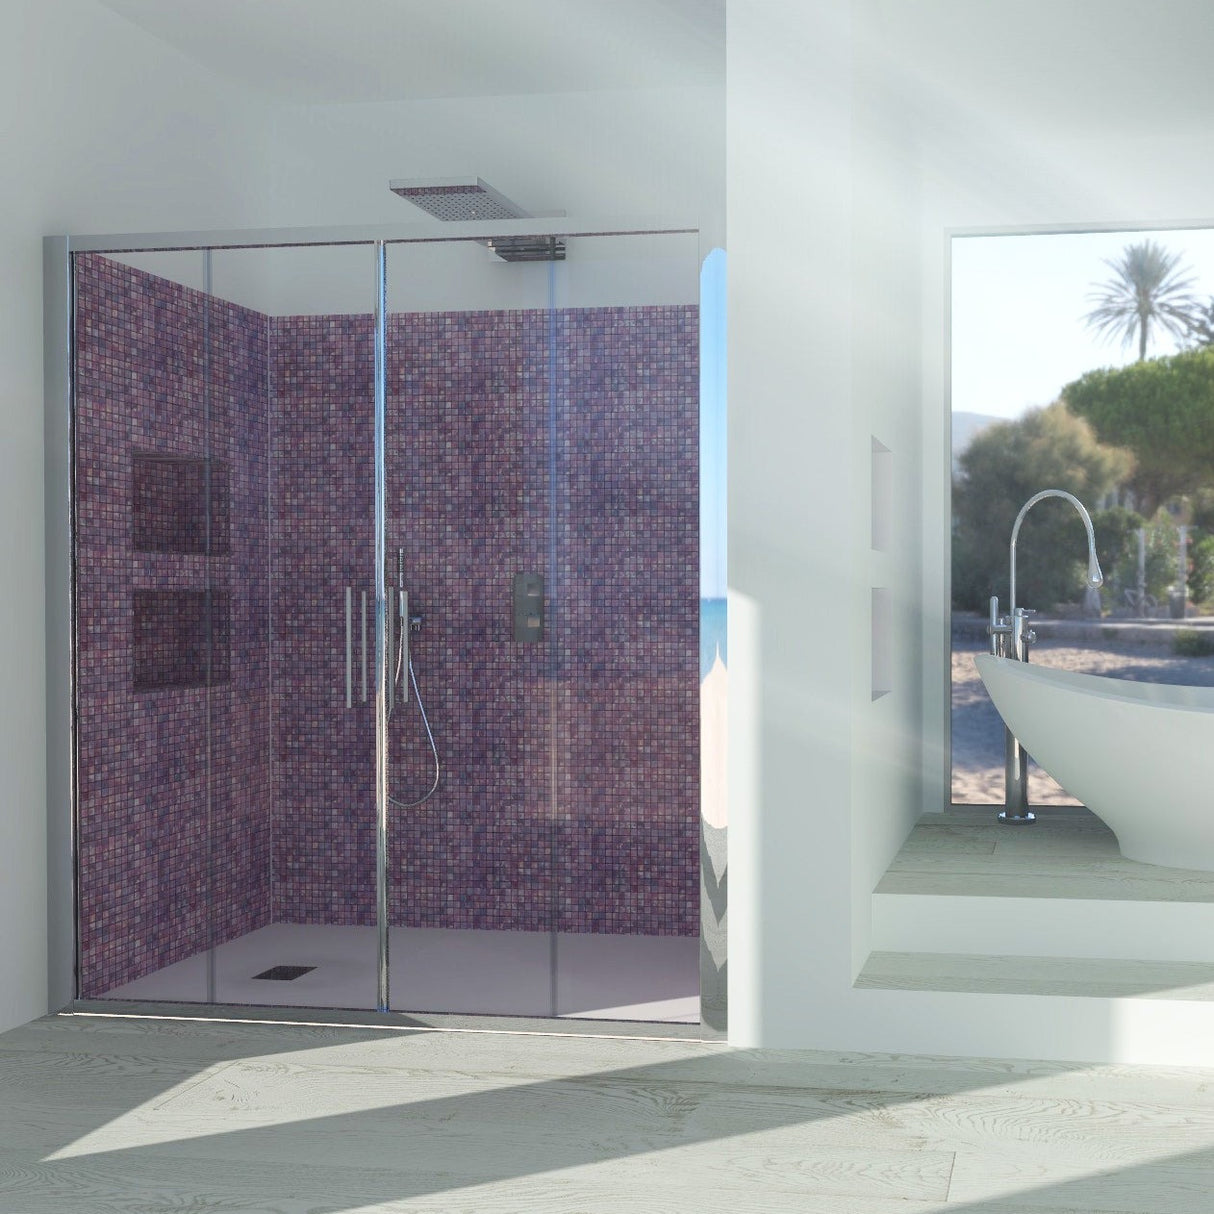 Shower Enclosure in Niche DALIA N.2FS Central opening with 4 doors - 4 mm Tempered Transparent Glass Polished Silver Profile